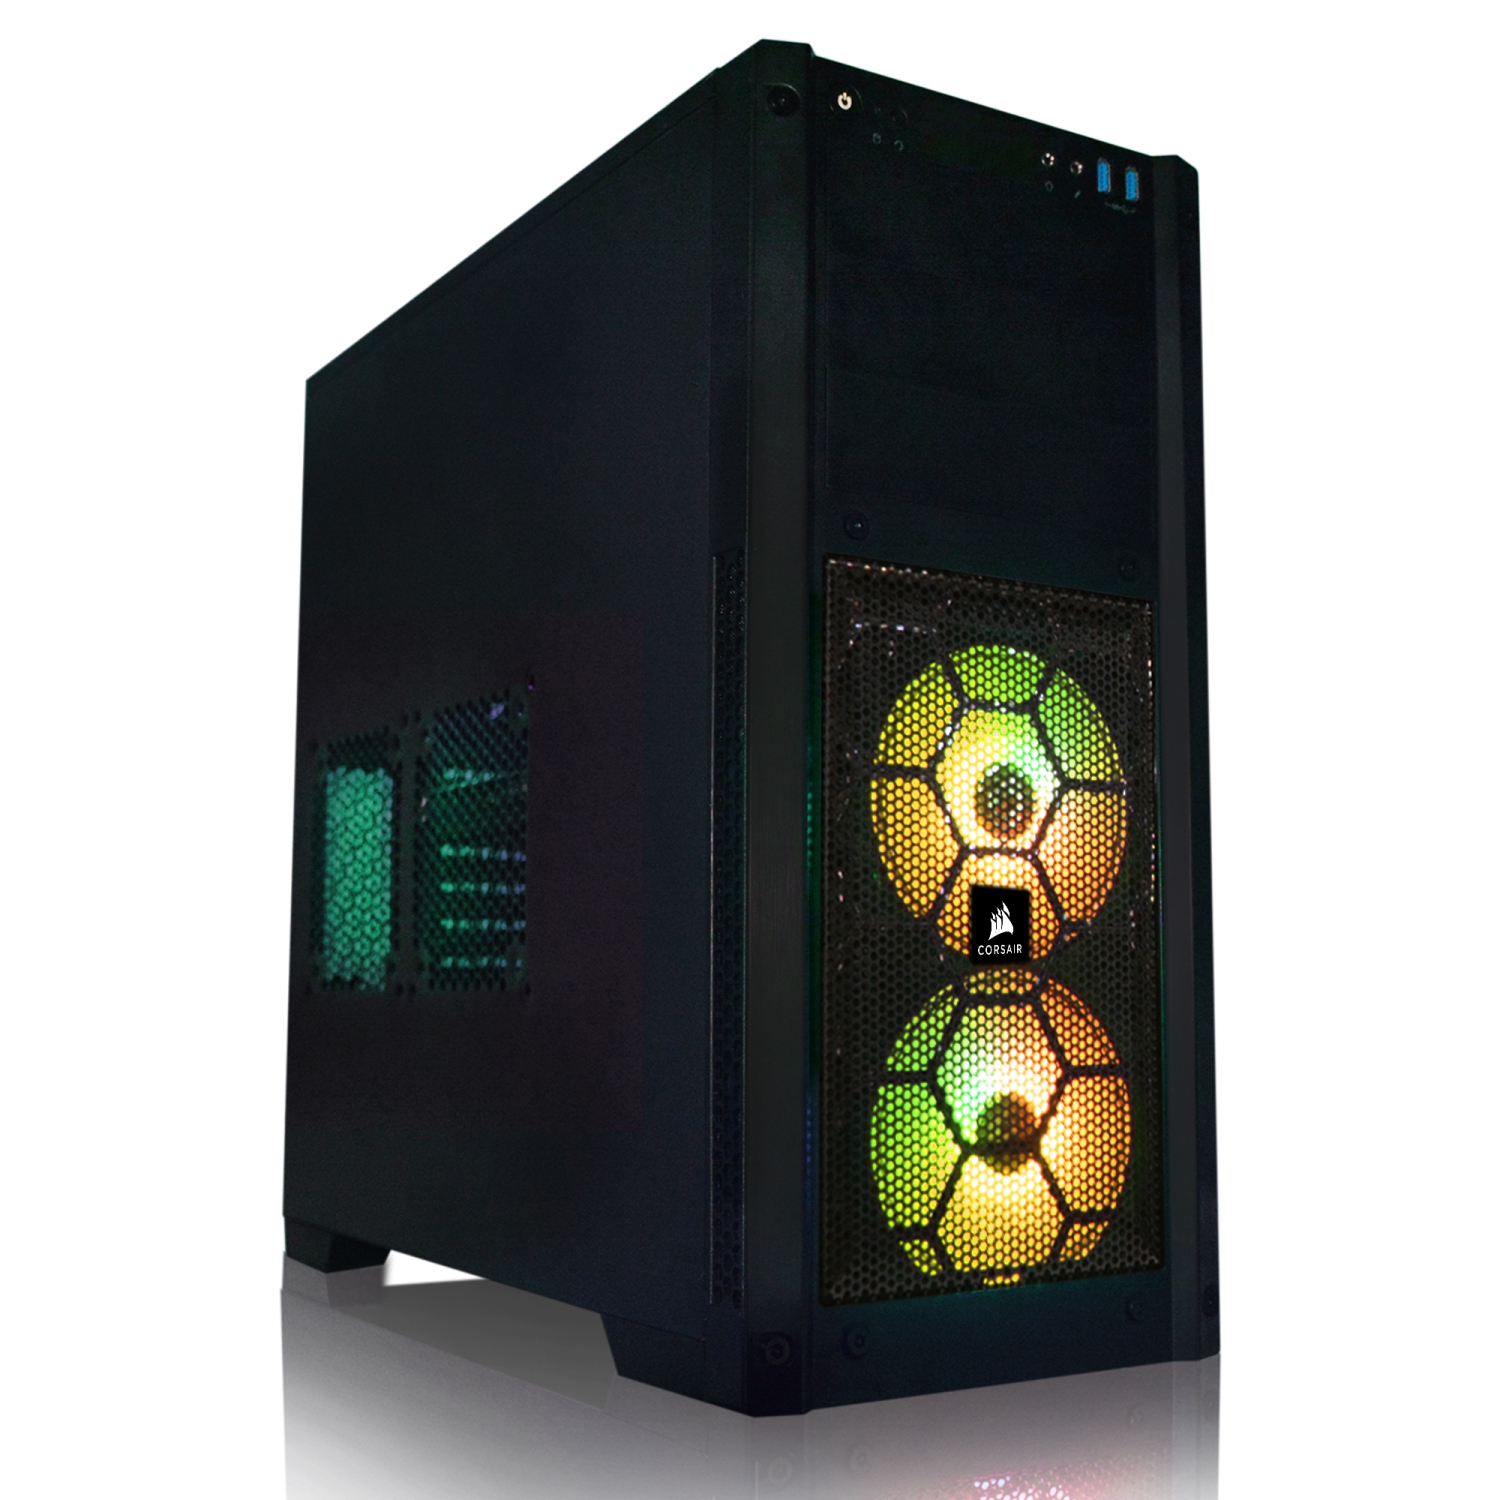 Refurbished (Good) - Gaming PC AMD 8-Core FX upto 4.2GHz Processor 16GB RAM 1TB SSD GeForce GT1030 DDR5 Graphics ASUS Motherboard Corsair Chassis RGB KB/Mouse Windows 10 WIFI